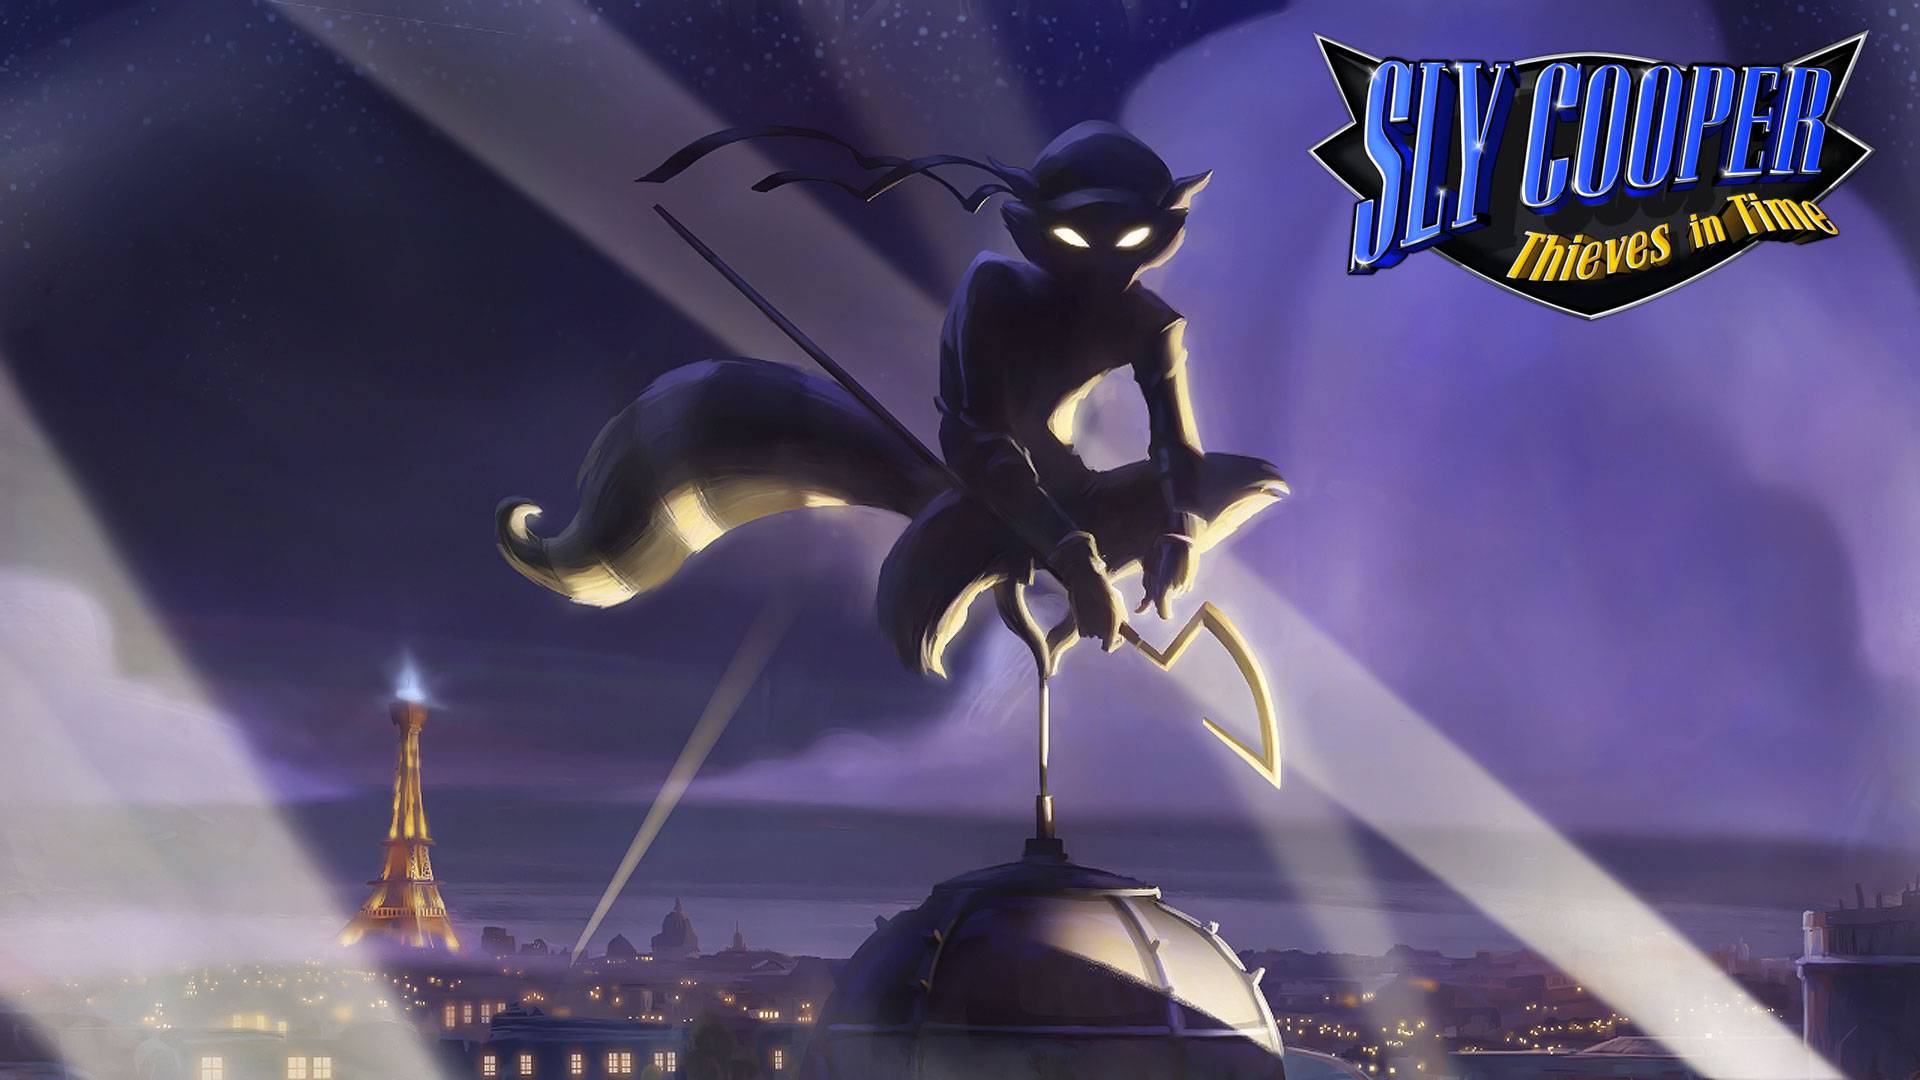 Sly Cooper: Thieves in Time Wallpapers in 1080P HD « GamingBolt